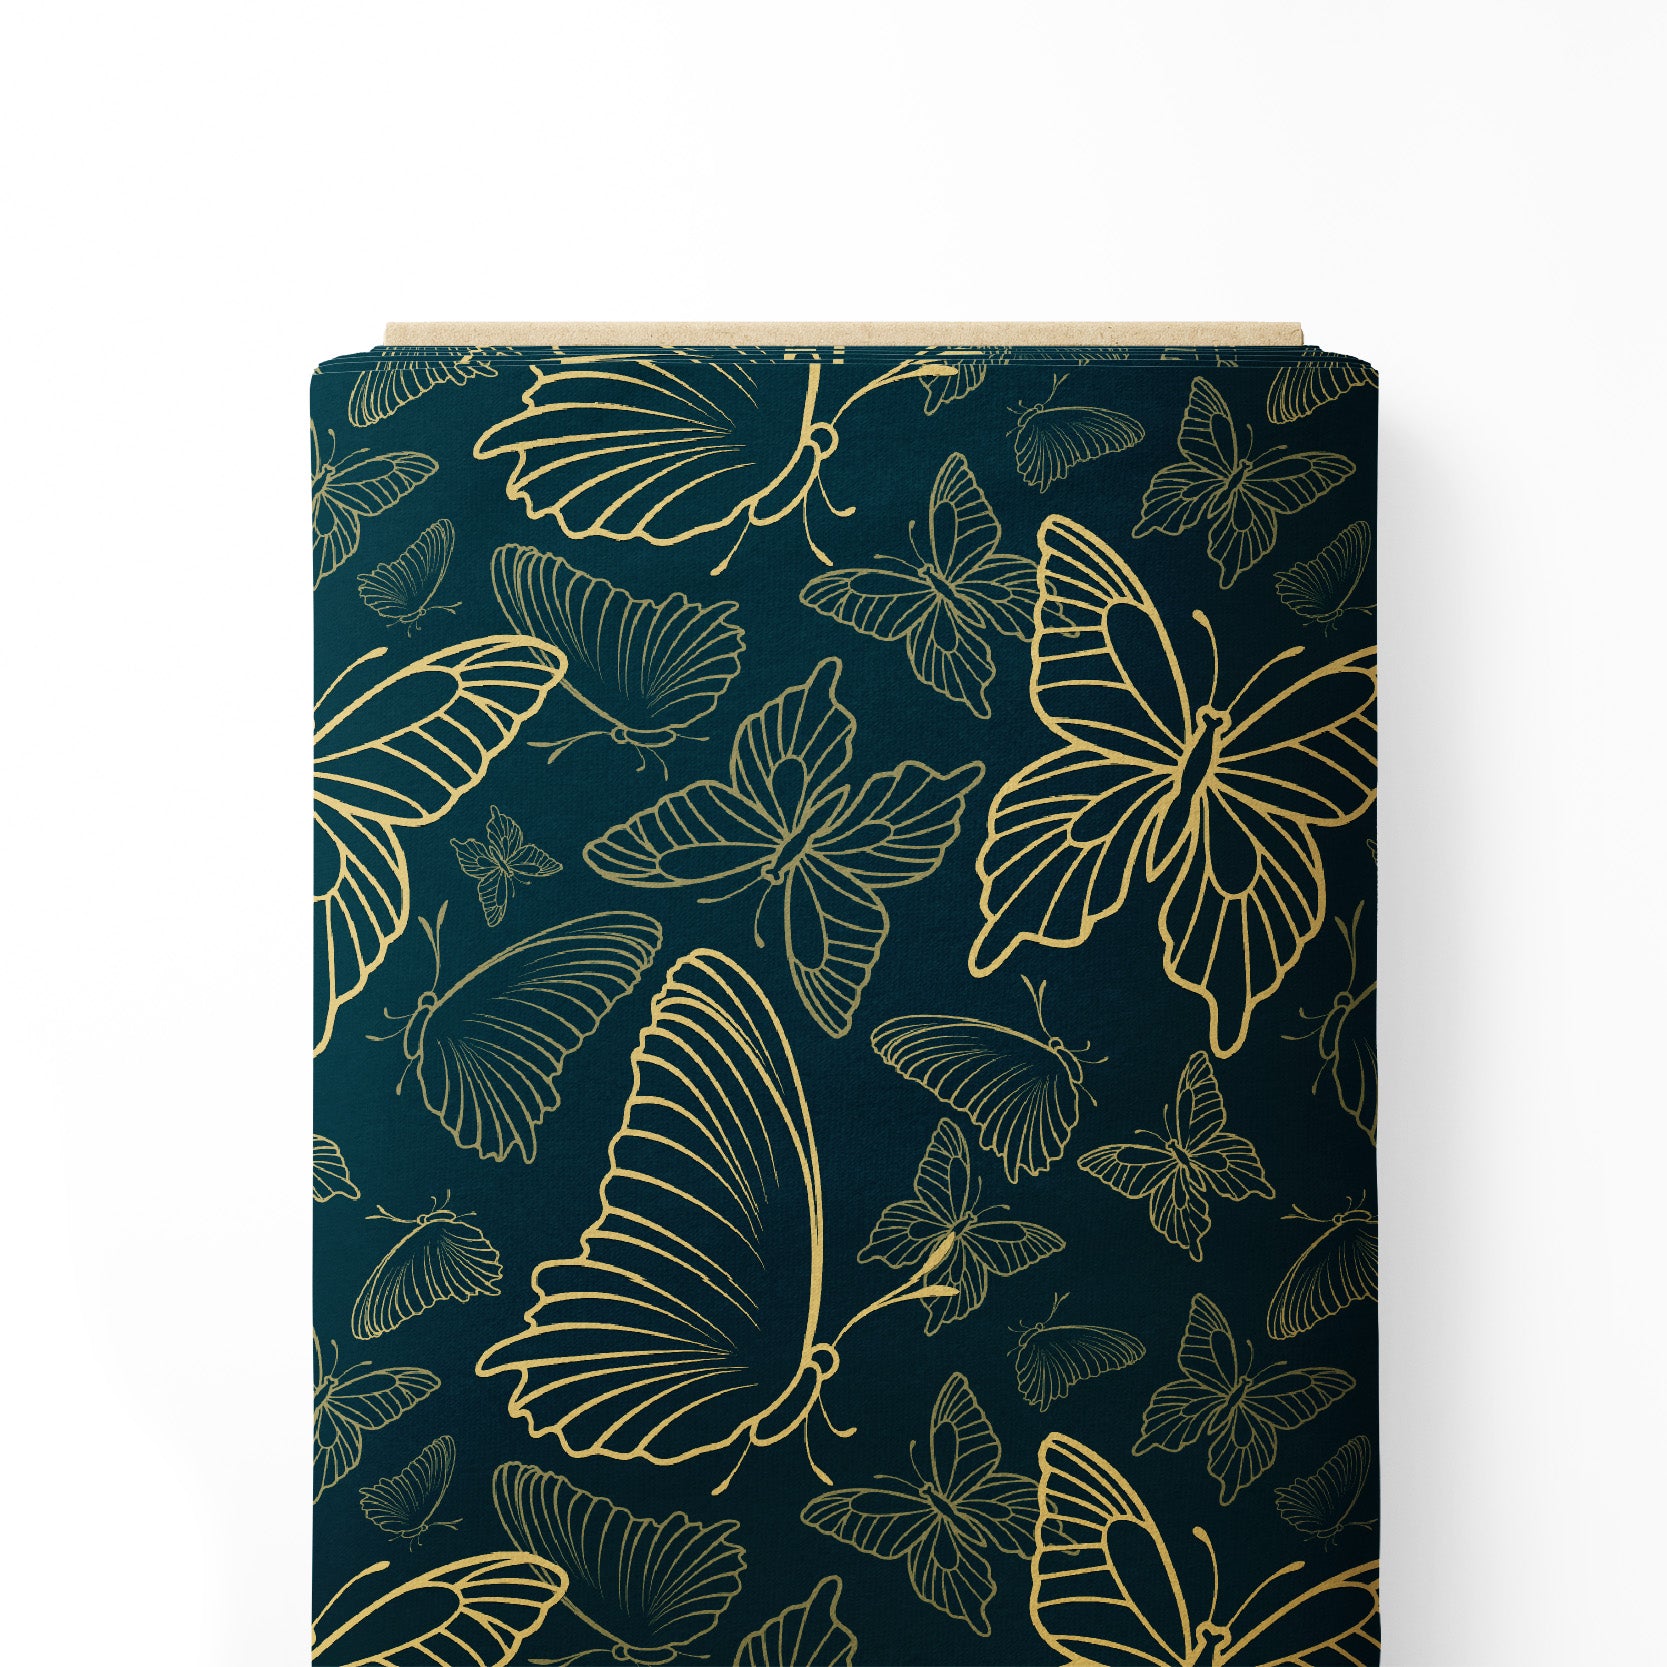 Butterfly Gold embossed Teal Aquamarine